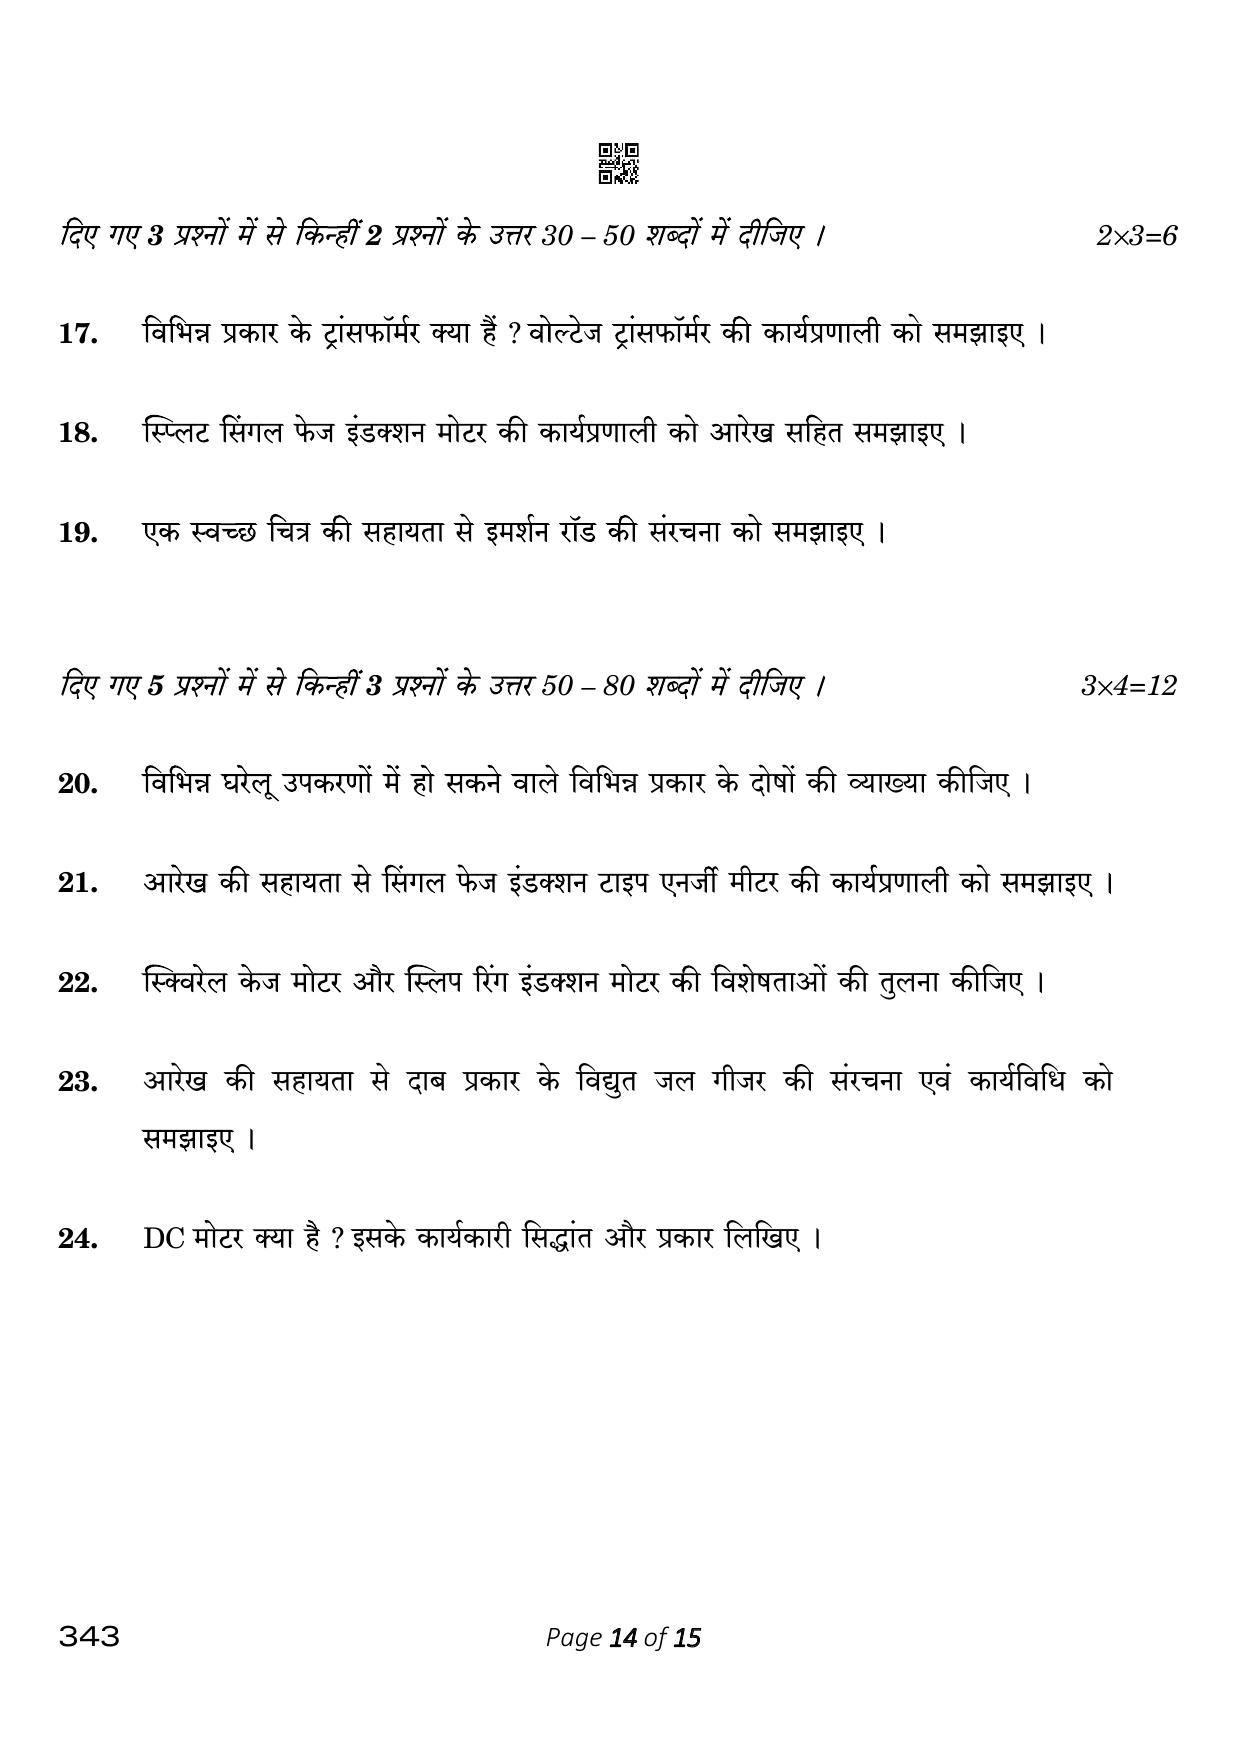 CBSE Class 12 343_Electrical Technology 2023 Question Paper - Page 14